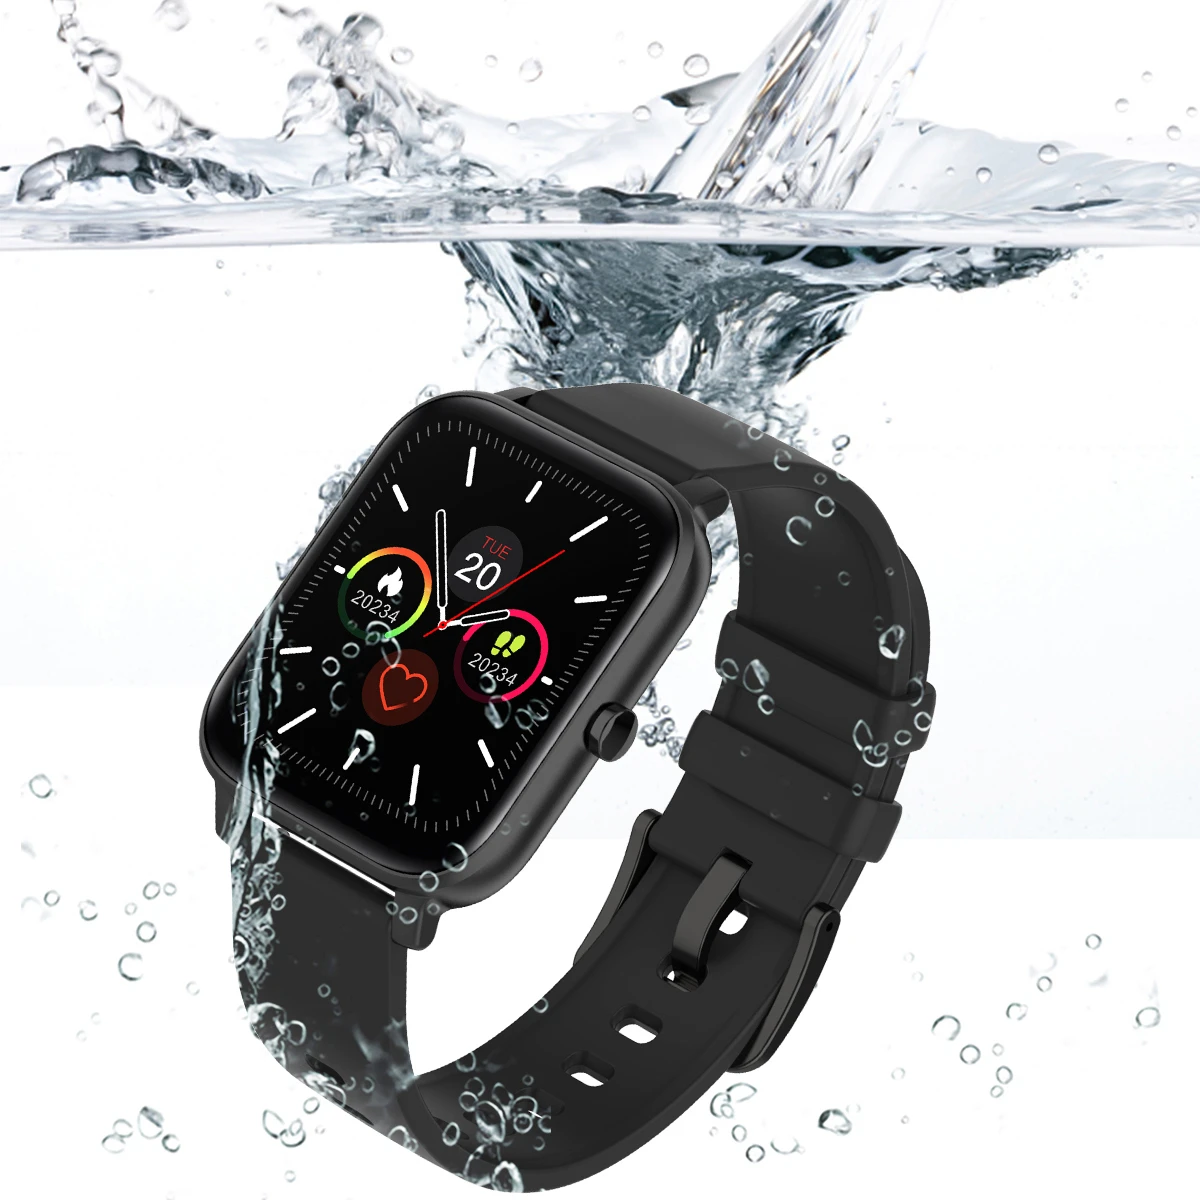 

Solar Mini Haylou LS02 IP68 Waterproof 12 Sport Models Blue tooth 5.0 Sport Heart Rate Monito English Version Smart Watch, Black white